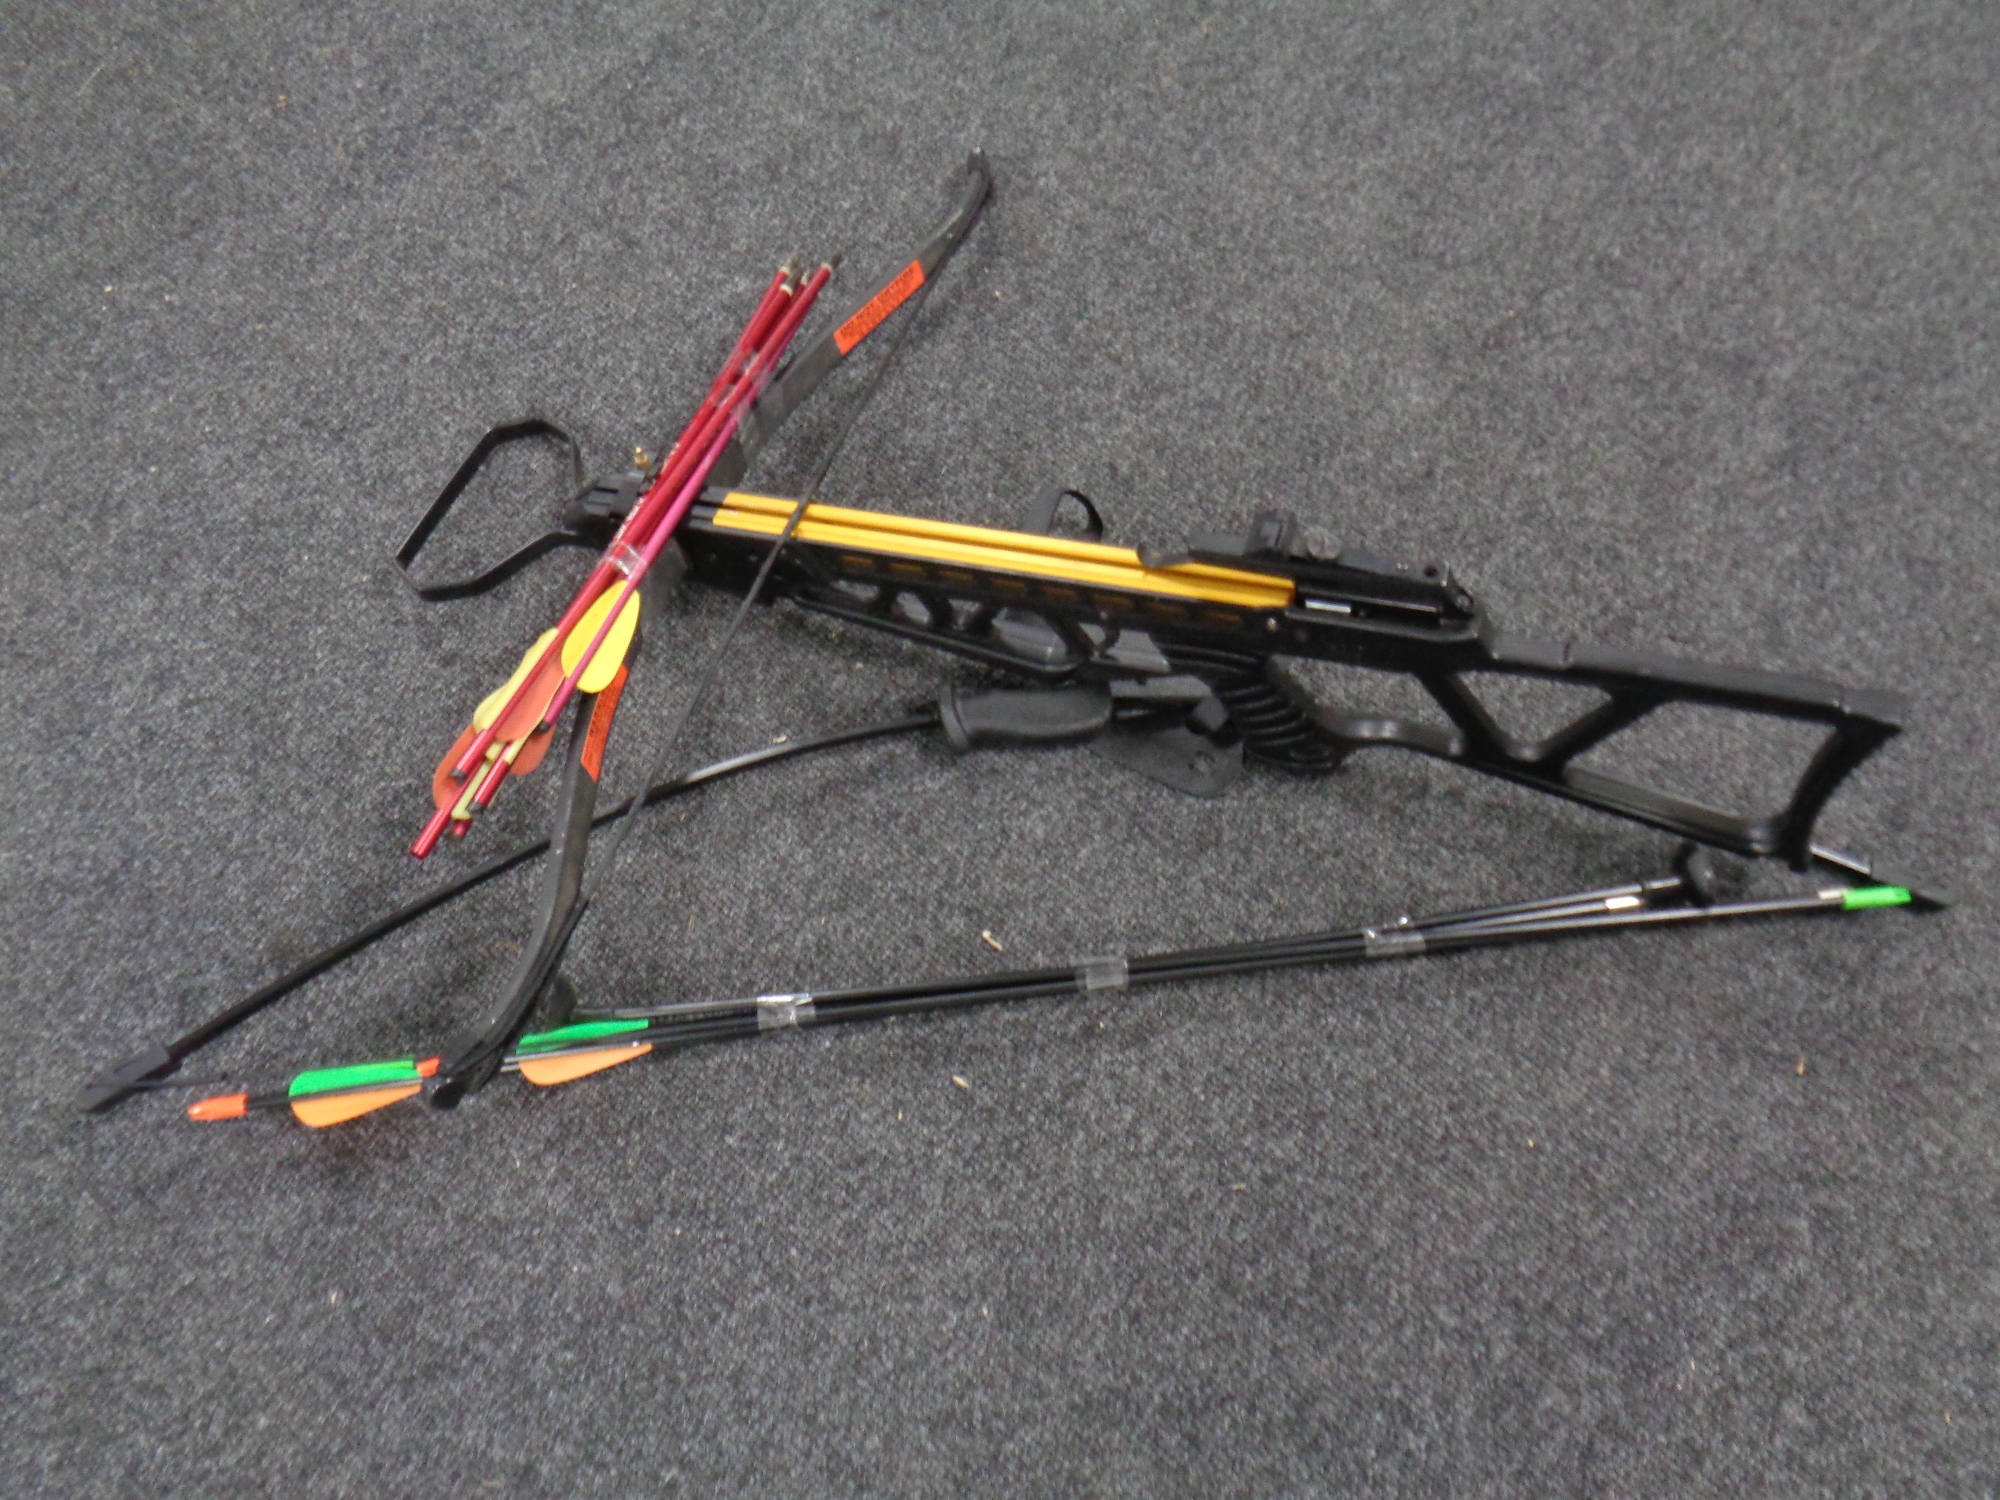 A crossbow with bolts together with an archery bow with arrows